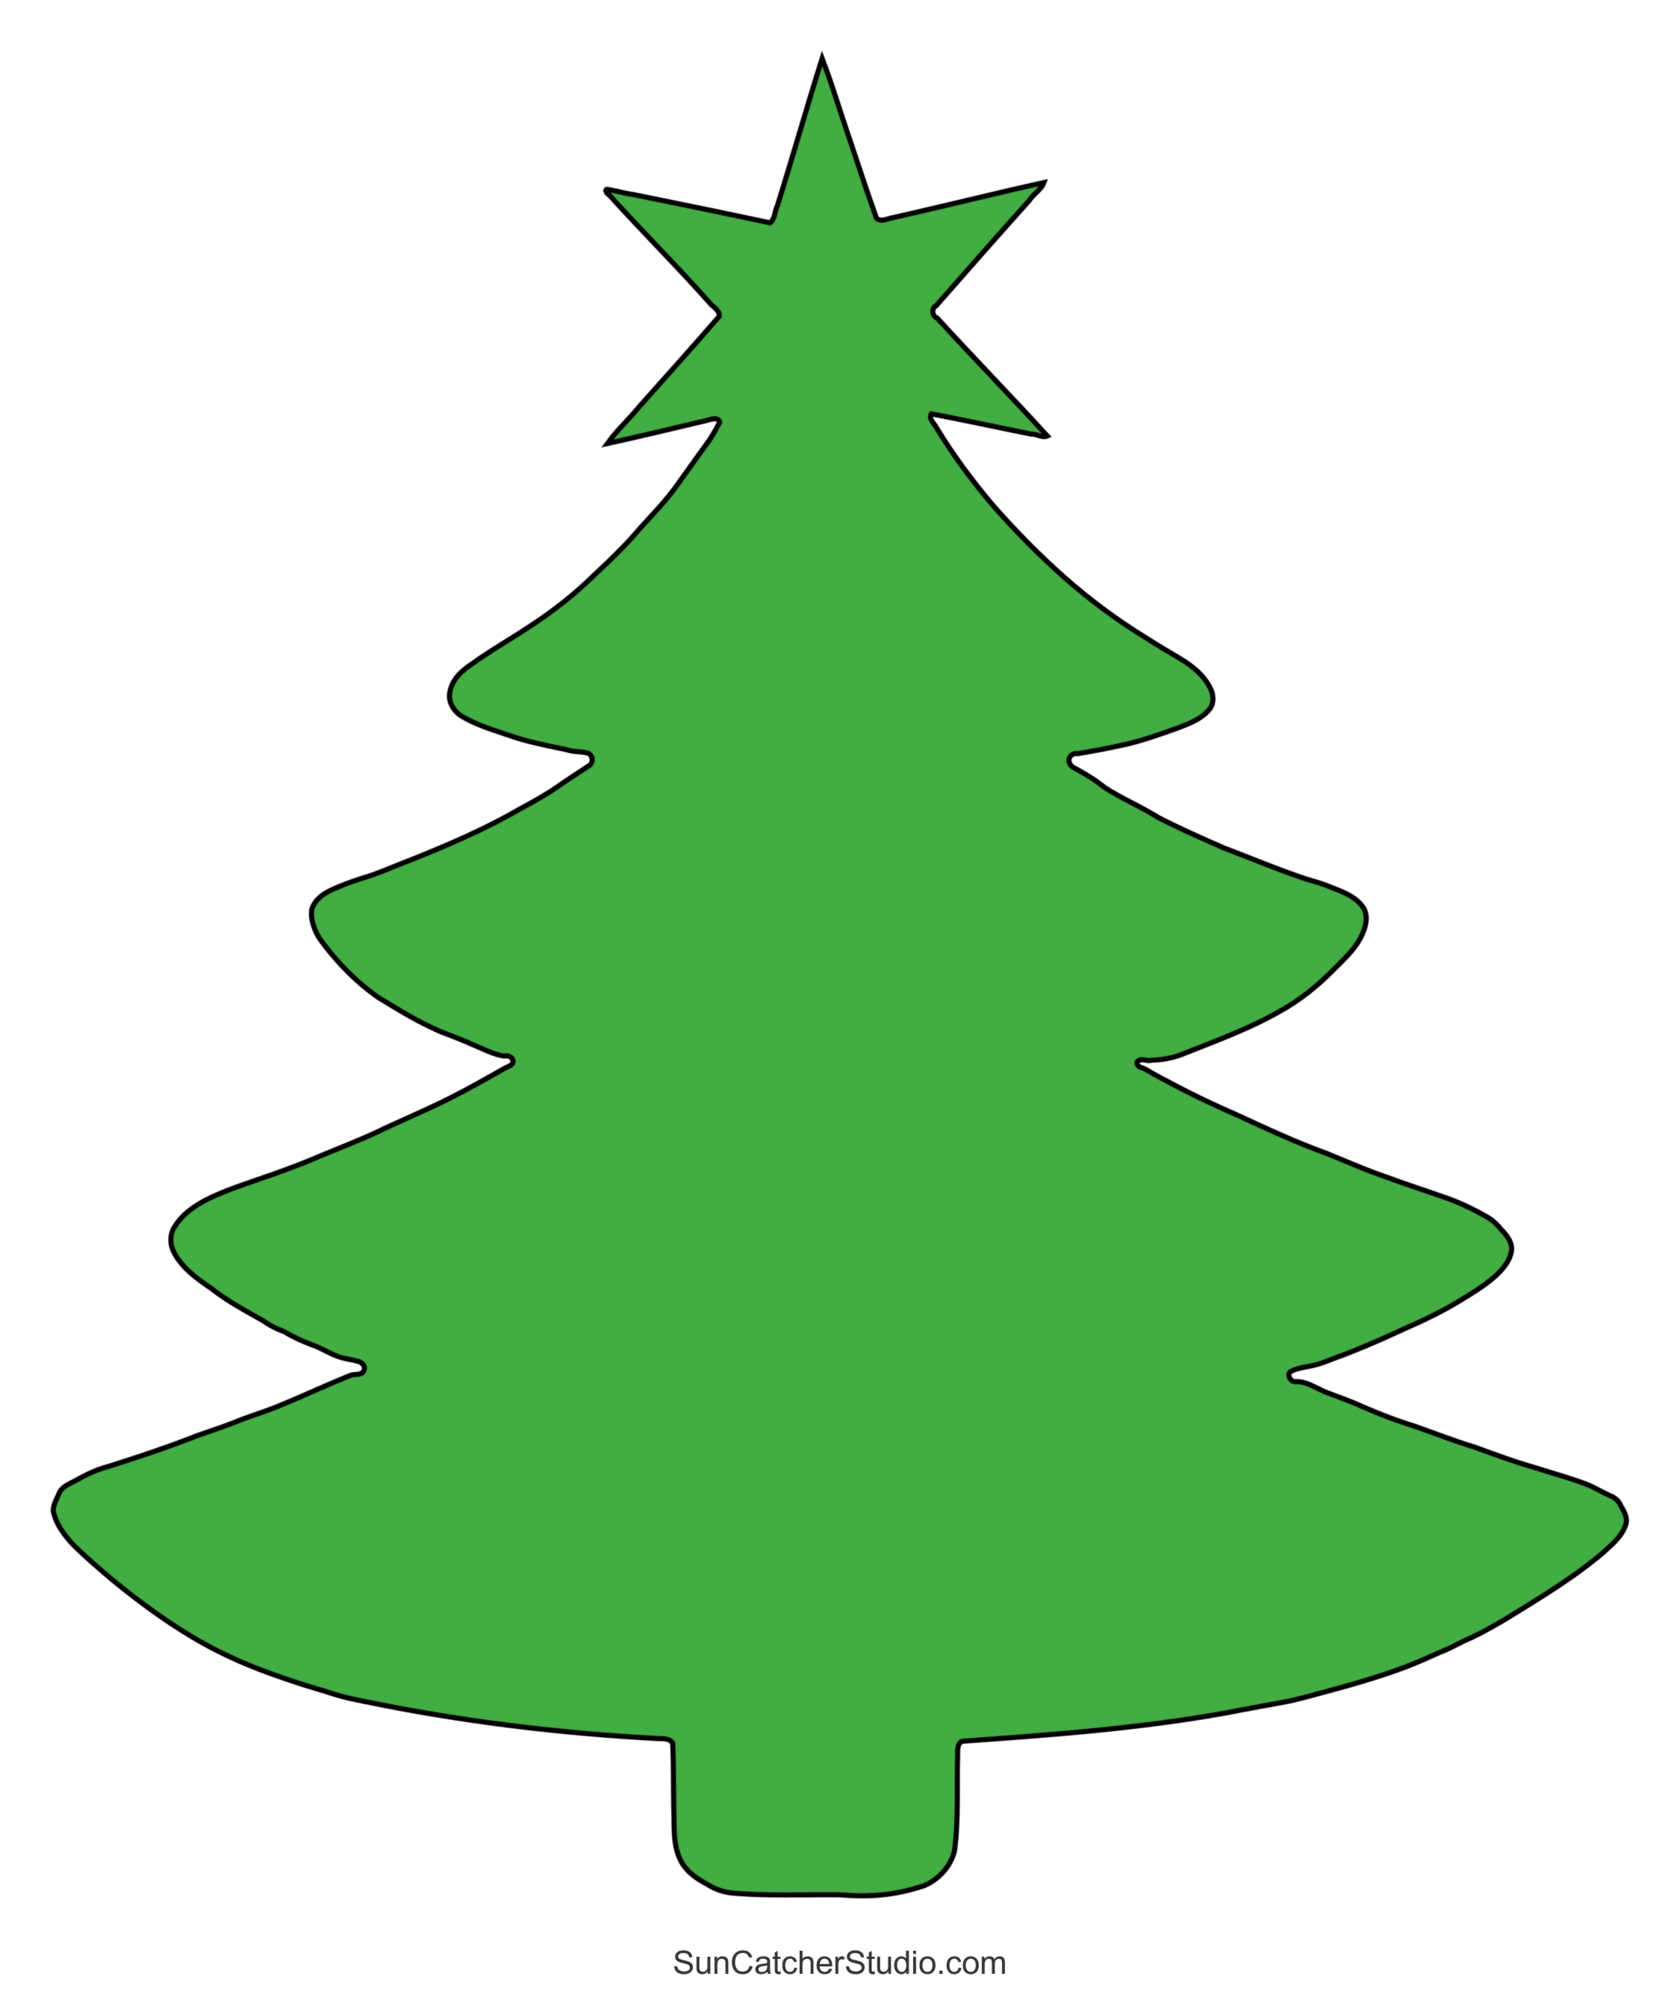 Christmas Tree Templates and Stencils (Free Printable Patterns) – DIY  Projects, Patterns, Monograms, Designs, Templates